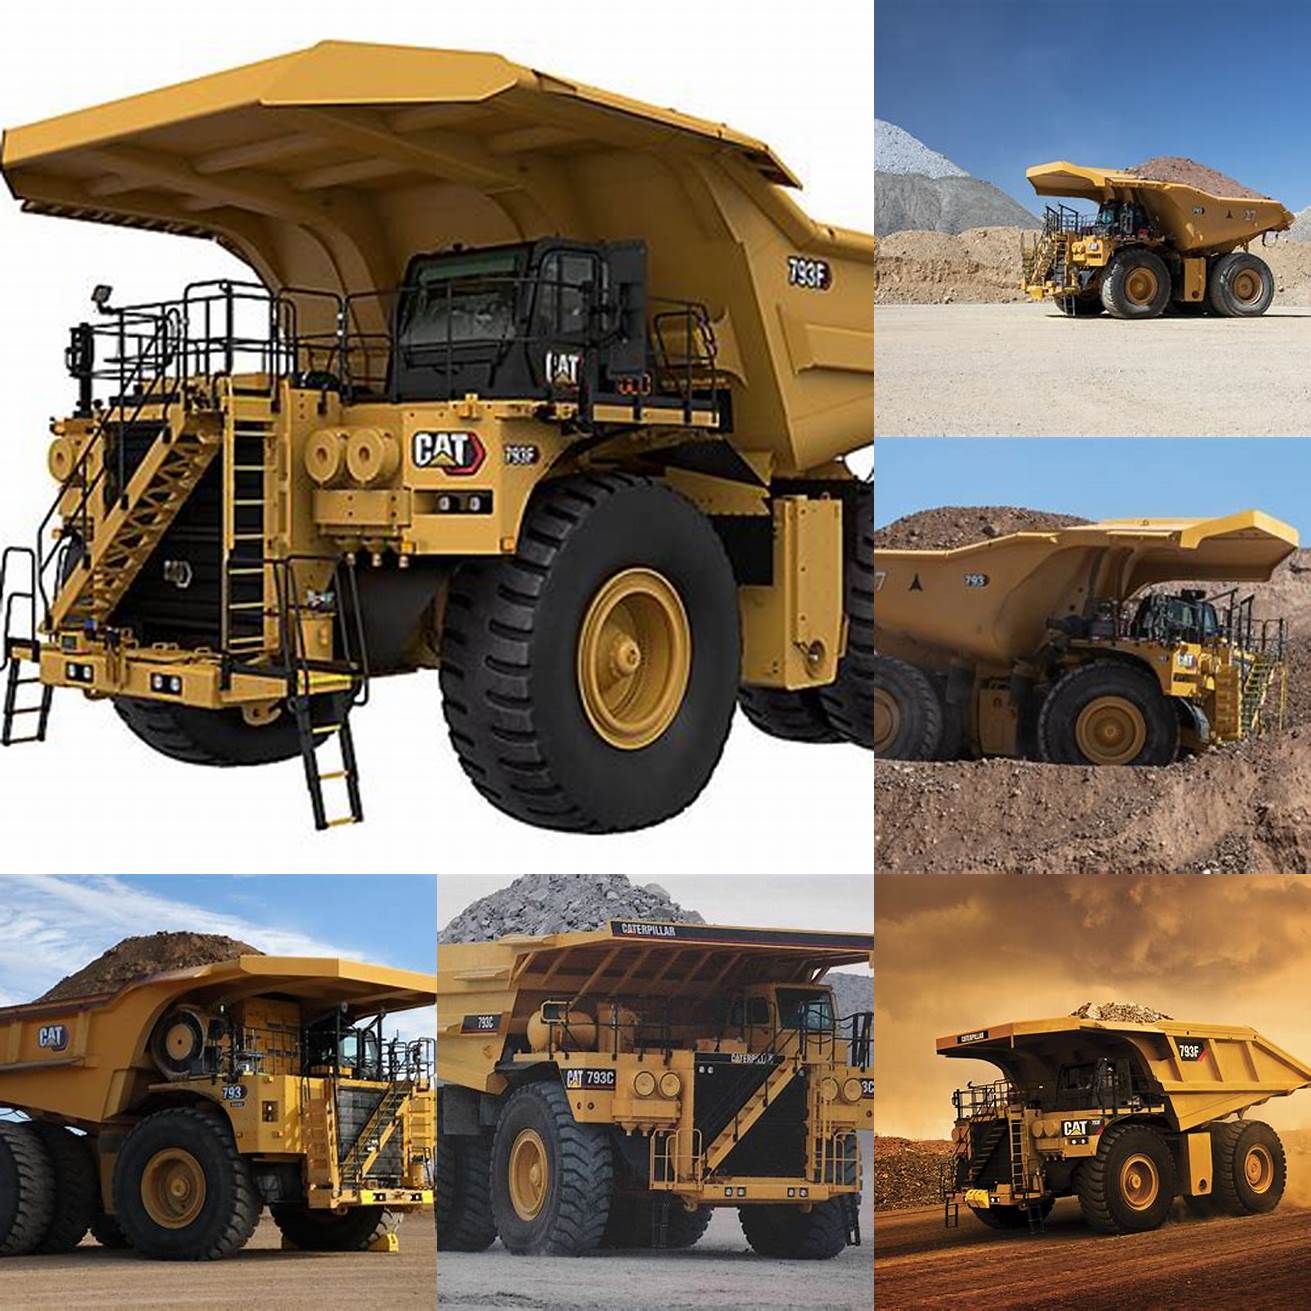 Q What is the fuel efficiency of the Cat 793 haul truck